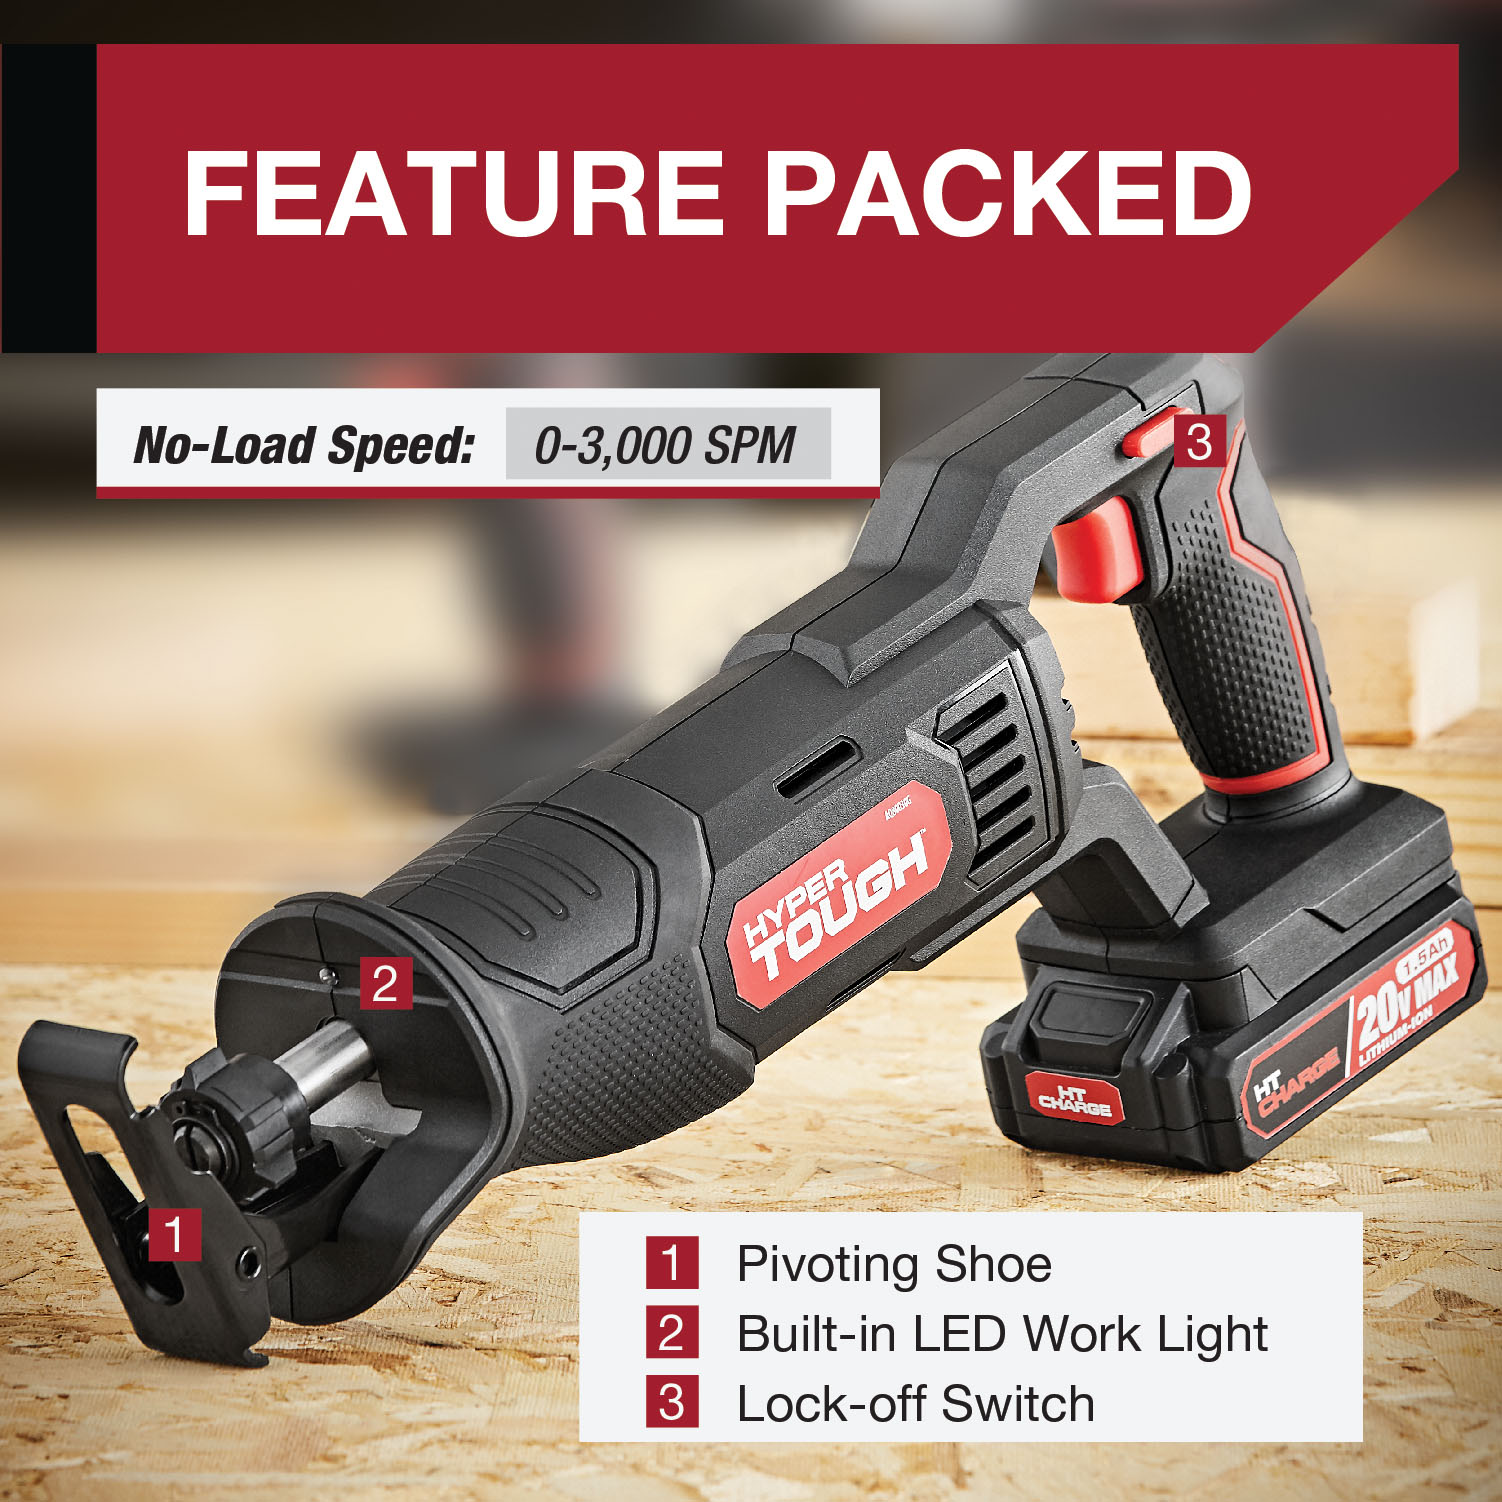 Hyper Tough 20V Max Lithium-ion Cordless Reciprocating Saw, Variable Speed, Keyless Blade Change, with 1.5Ah Lithium-Ion Battery and Charger, Wood Blade and LED Light - image 5 of 28